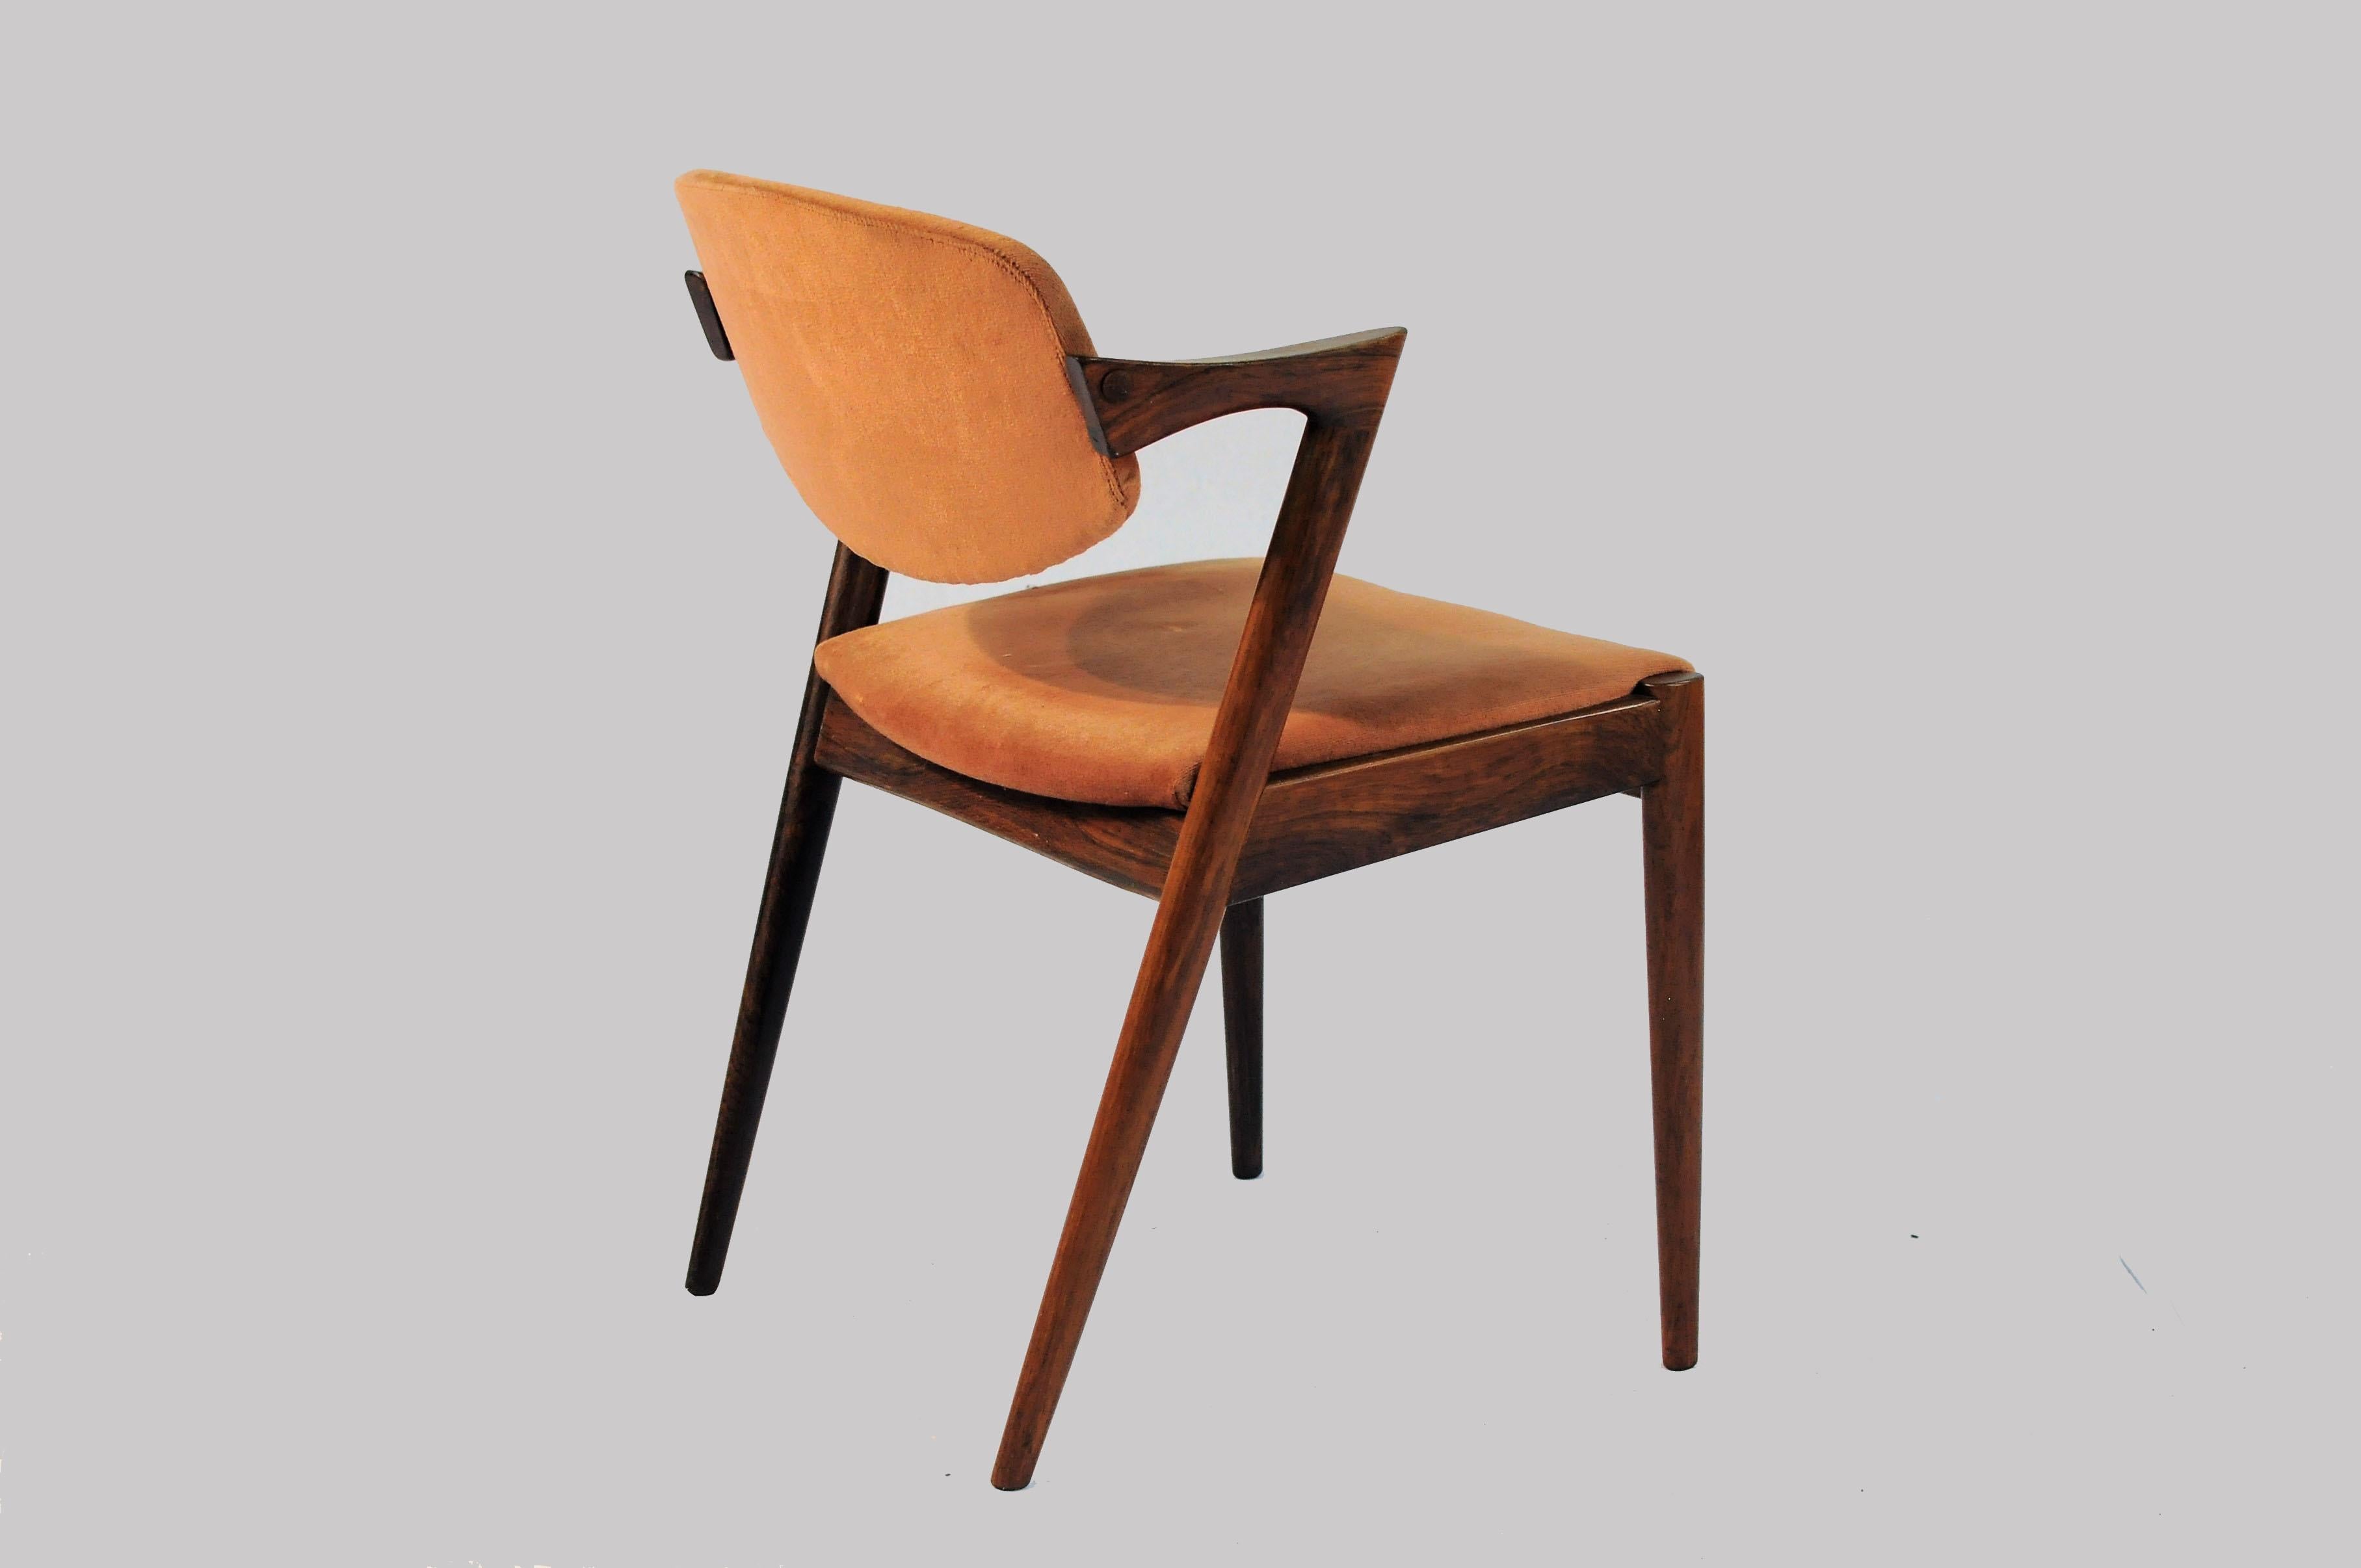 Ten Restored Kai Kristiansen Rosewood Dining Chairs Including Custom Upholstery In Good Condition For Sale In Knebel, DK